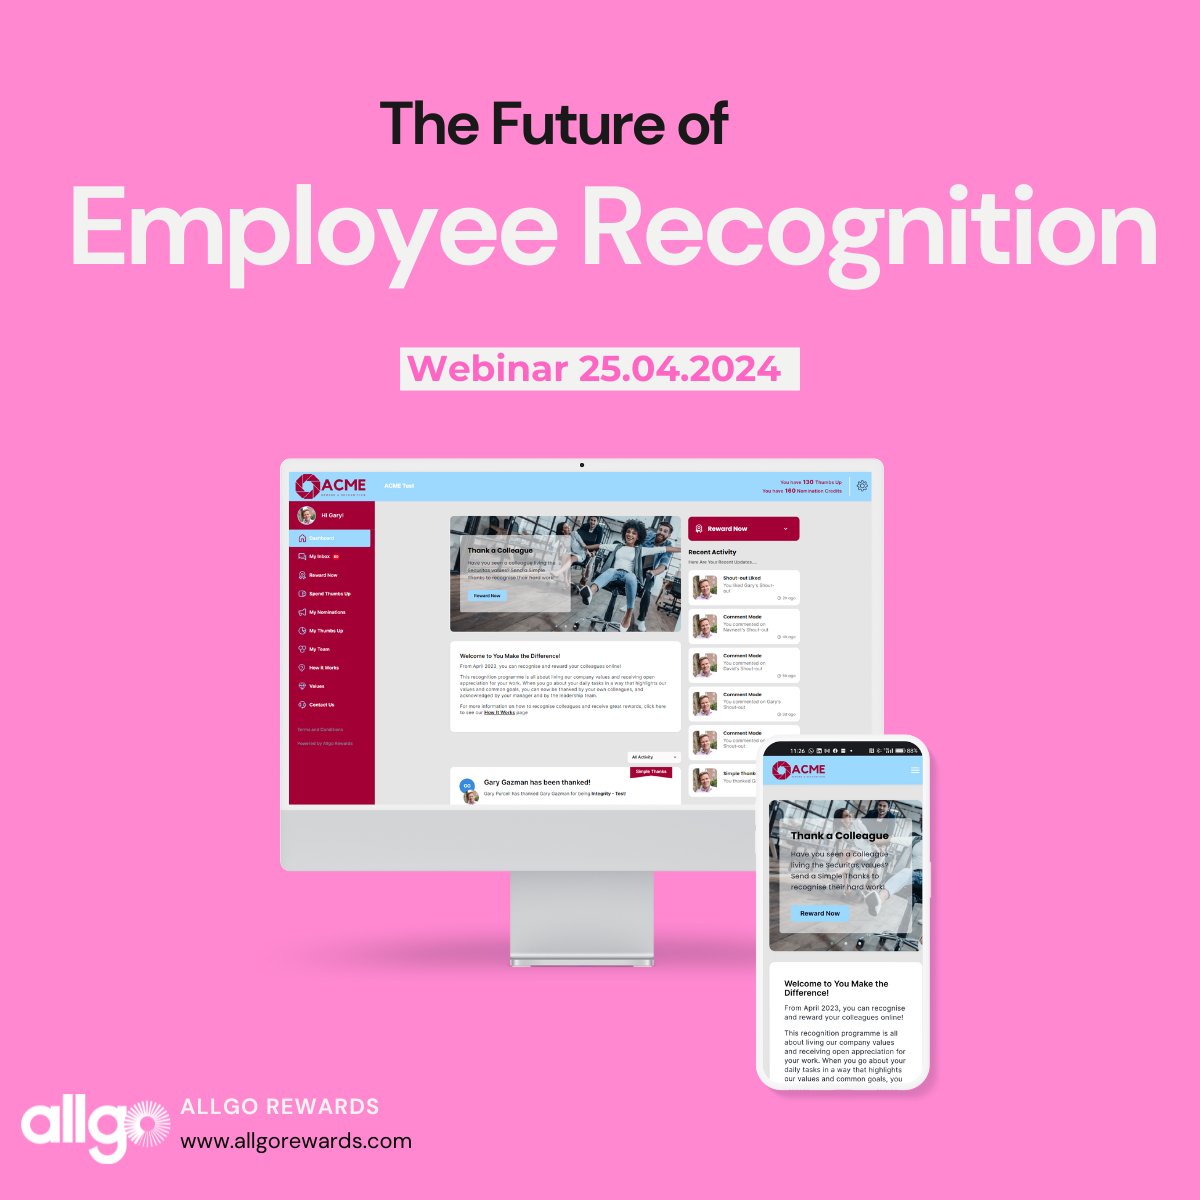 Join us for, The Future of Employee Recognition Webinar, our webinar on how Employee Recognition can transform your workplace culture and company results. Register today and join us on Thursday, April 25th at 11:00am. Register Here - hubs.ly/Q02s4Zcm0